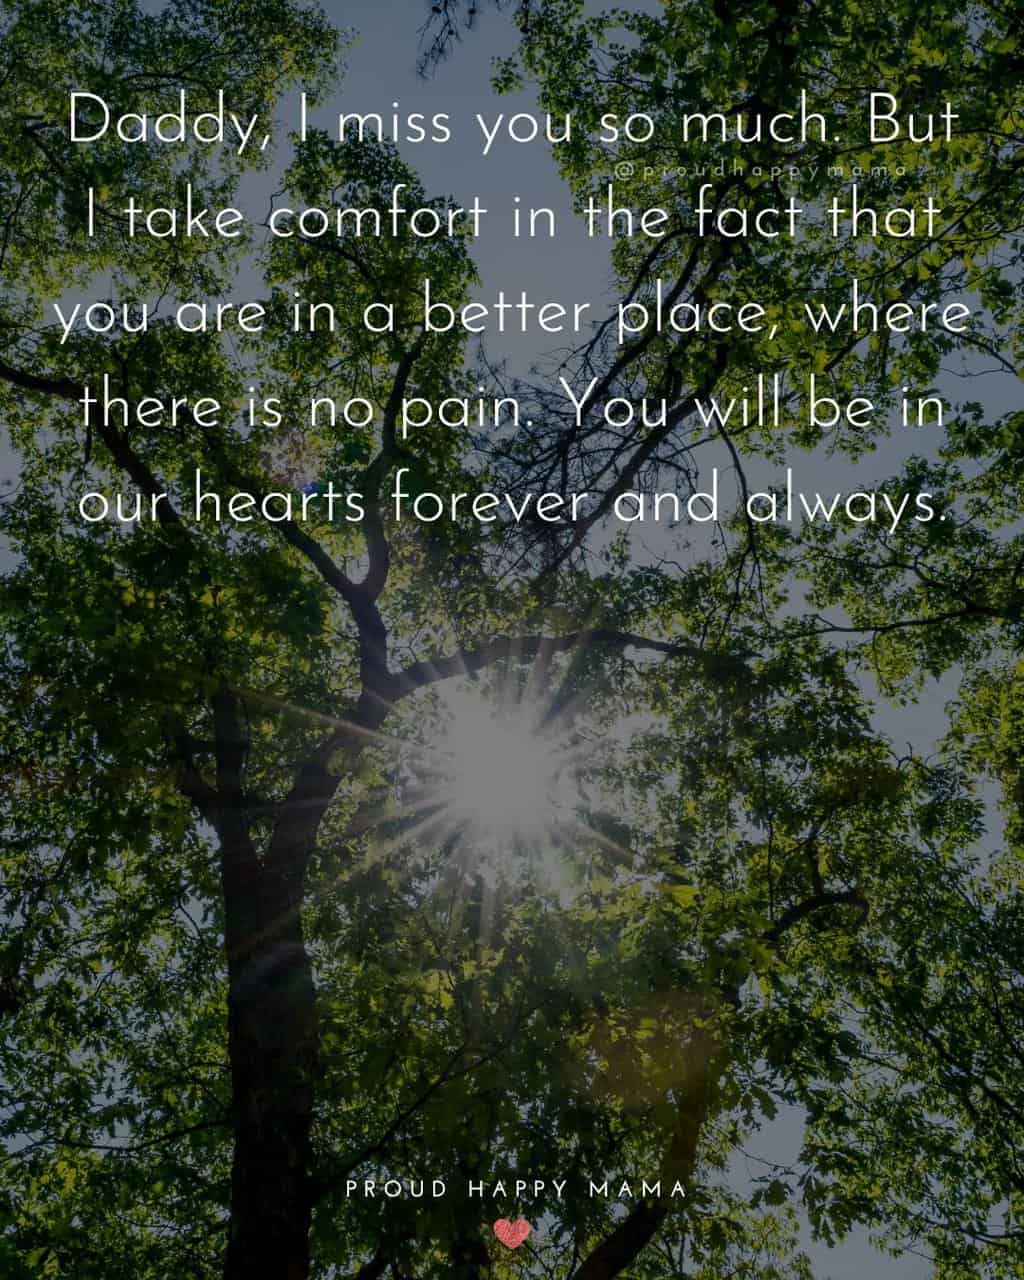 Sunlight beaming through tree with green leaves with missing father quote text overlay. ‘Daddy, I miss you so much. But I take comfort in the fact that you are in a better place, where there is no pain. You will be in our hearts forever and always.’